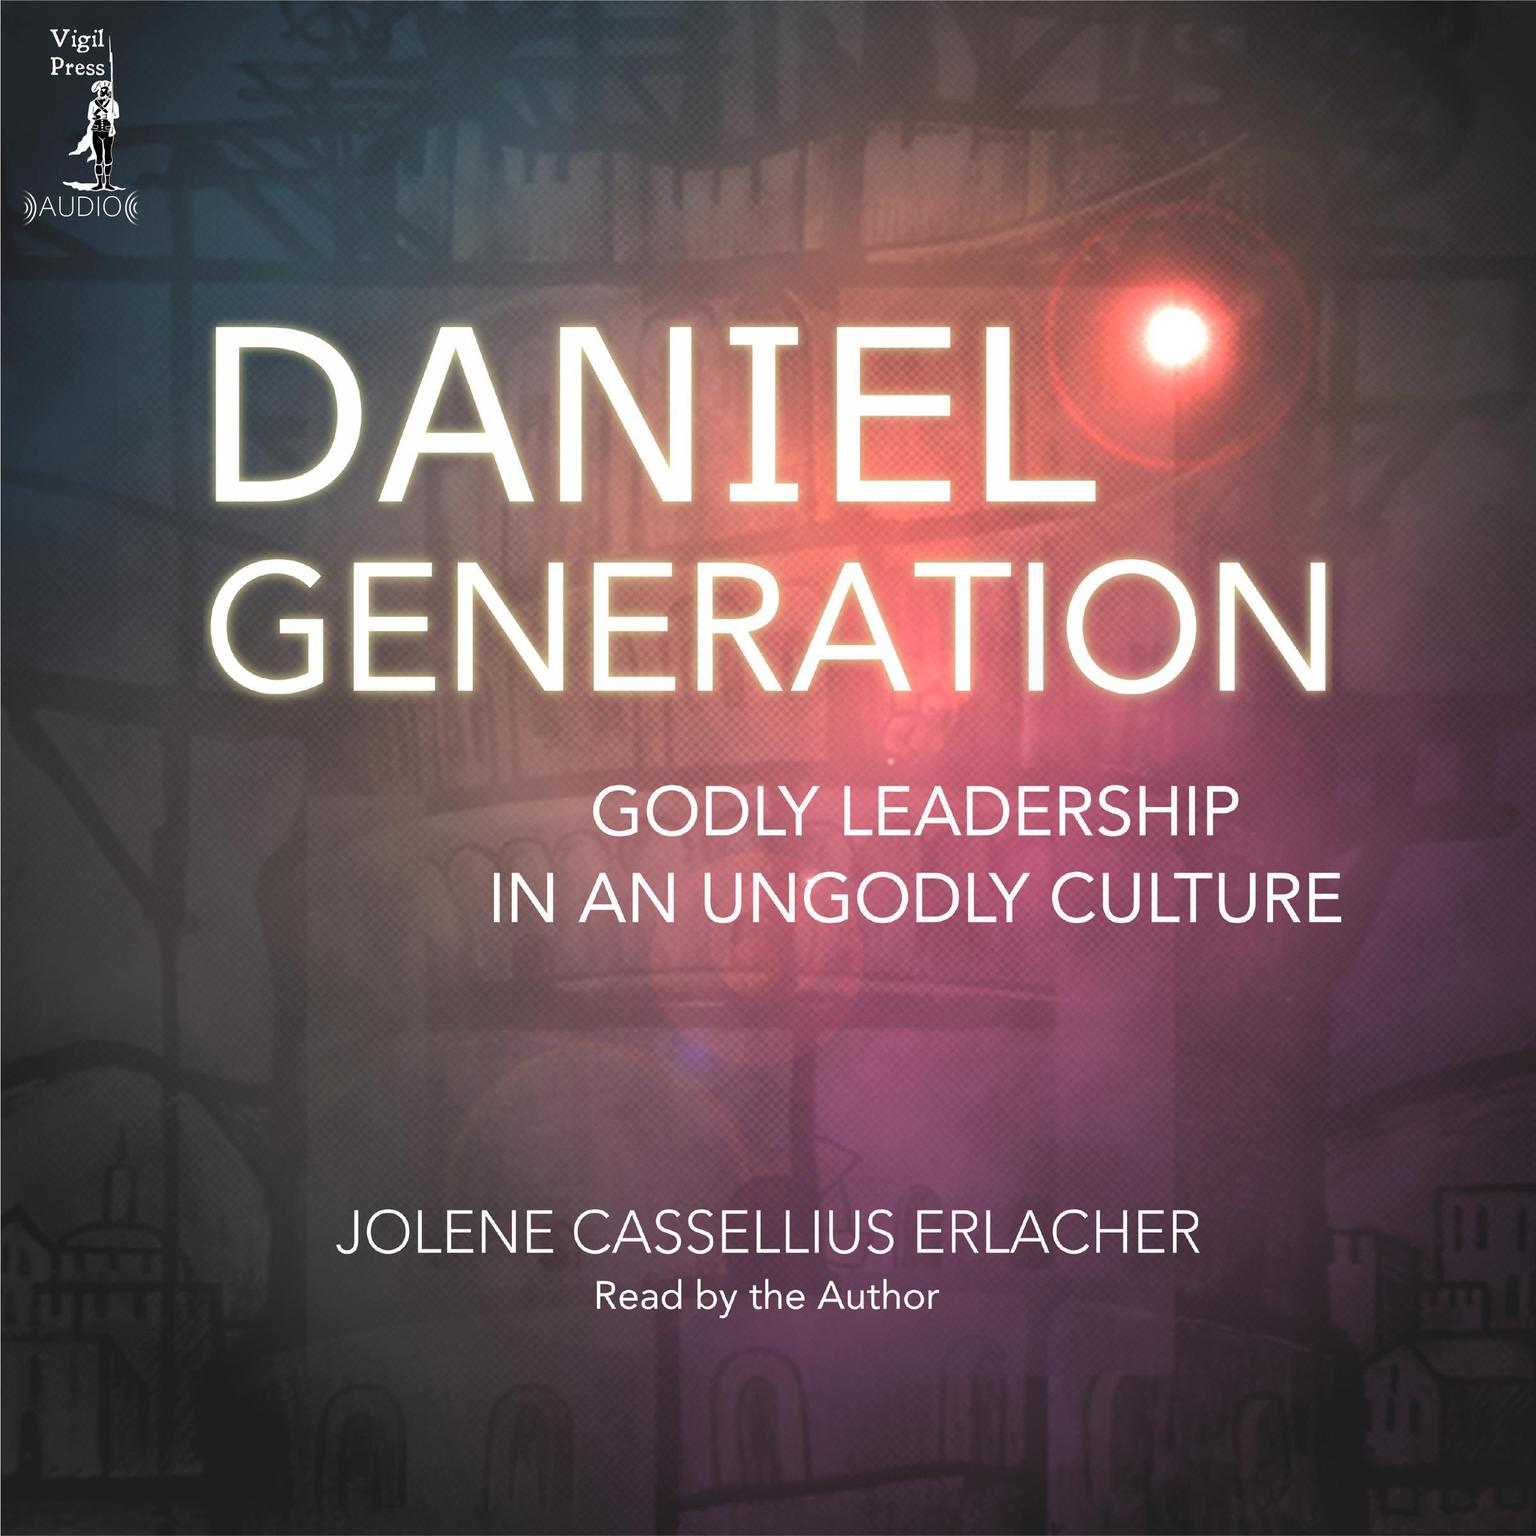 Daniel Generation: Godly Leadership in an Ungodly Culture  Audiobook, by Jolene Cassellius Erlacher